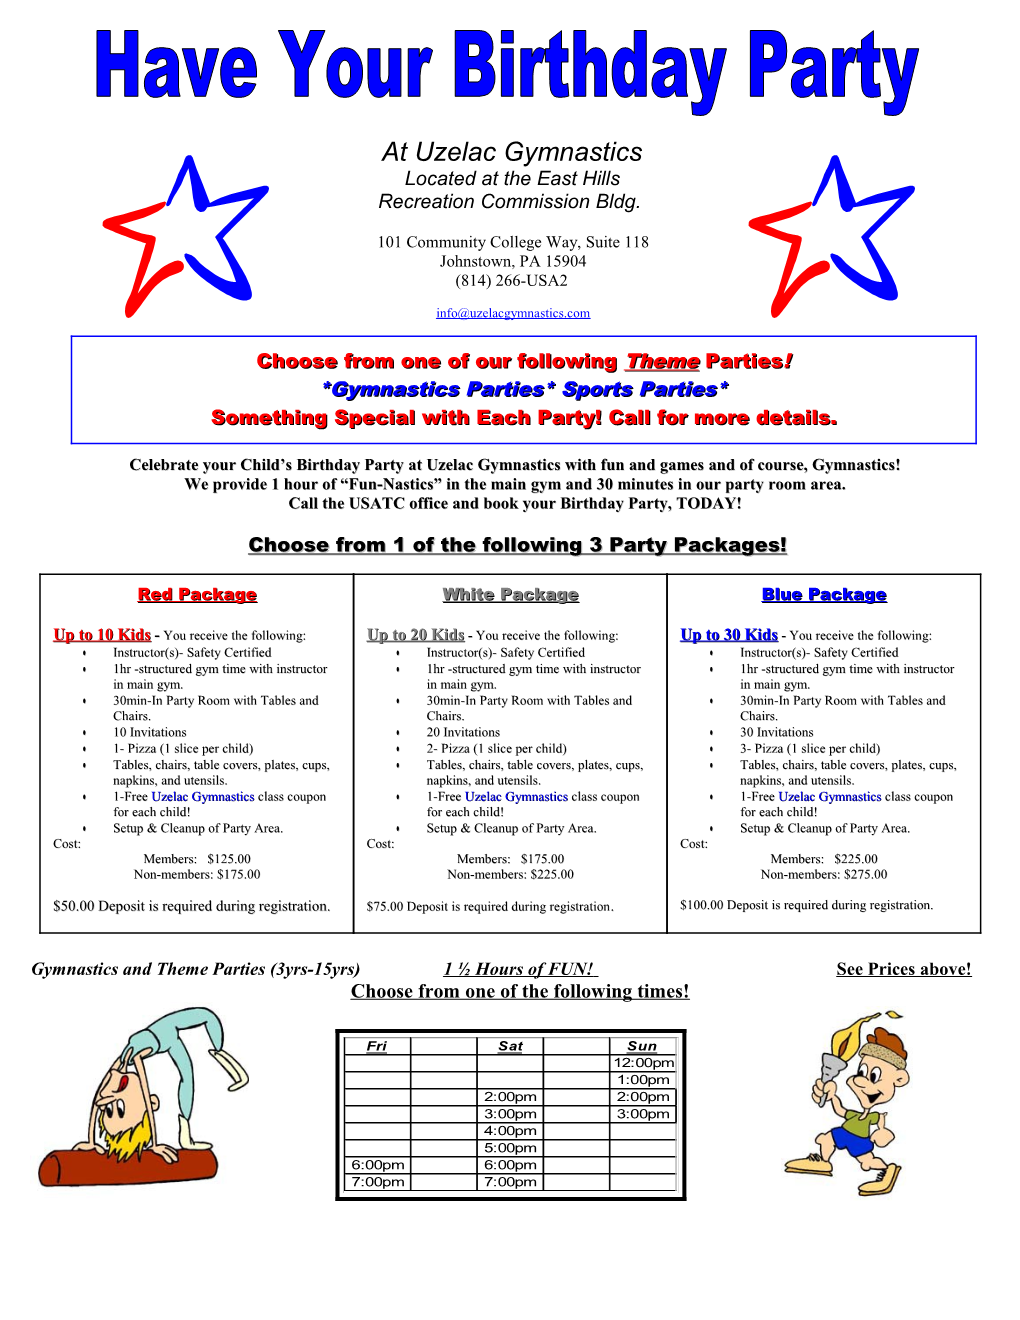 Gymnastics and Theme Parties (3Yrs-15Yrs) 1 Hours of FUN! See Prices Above!